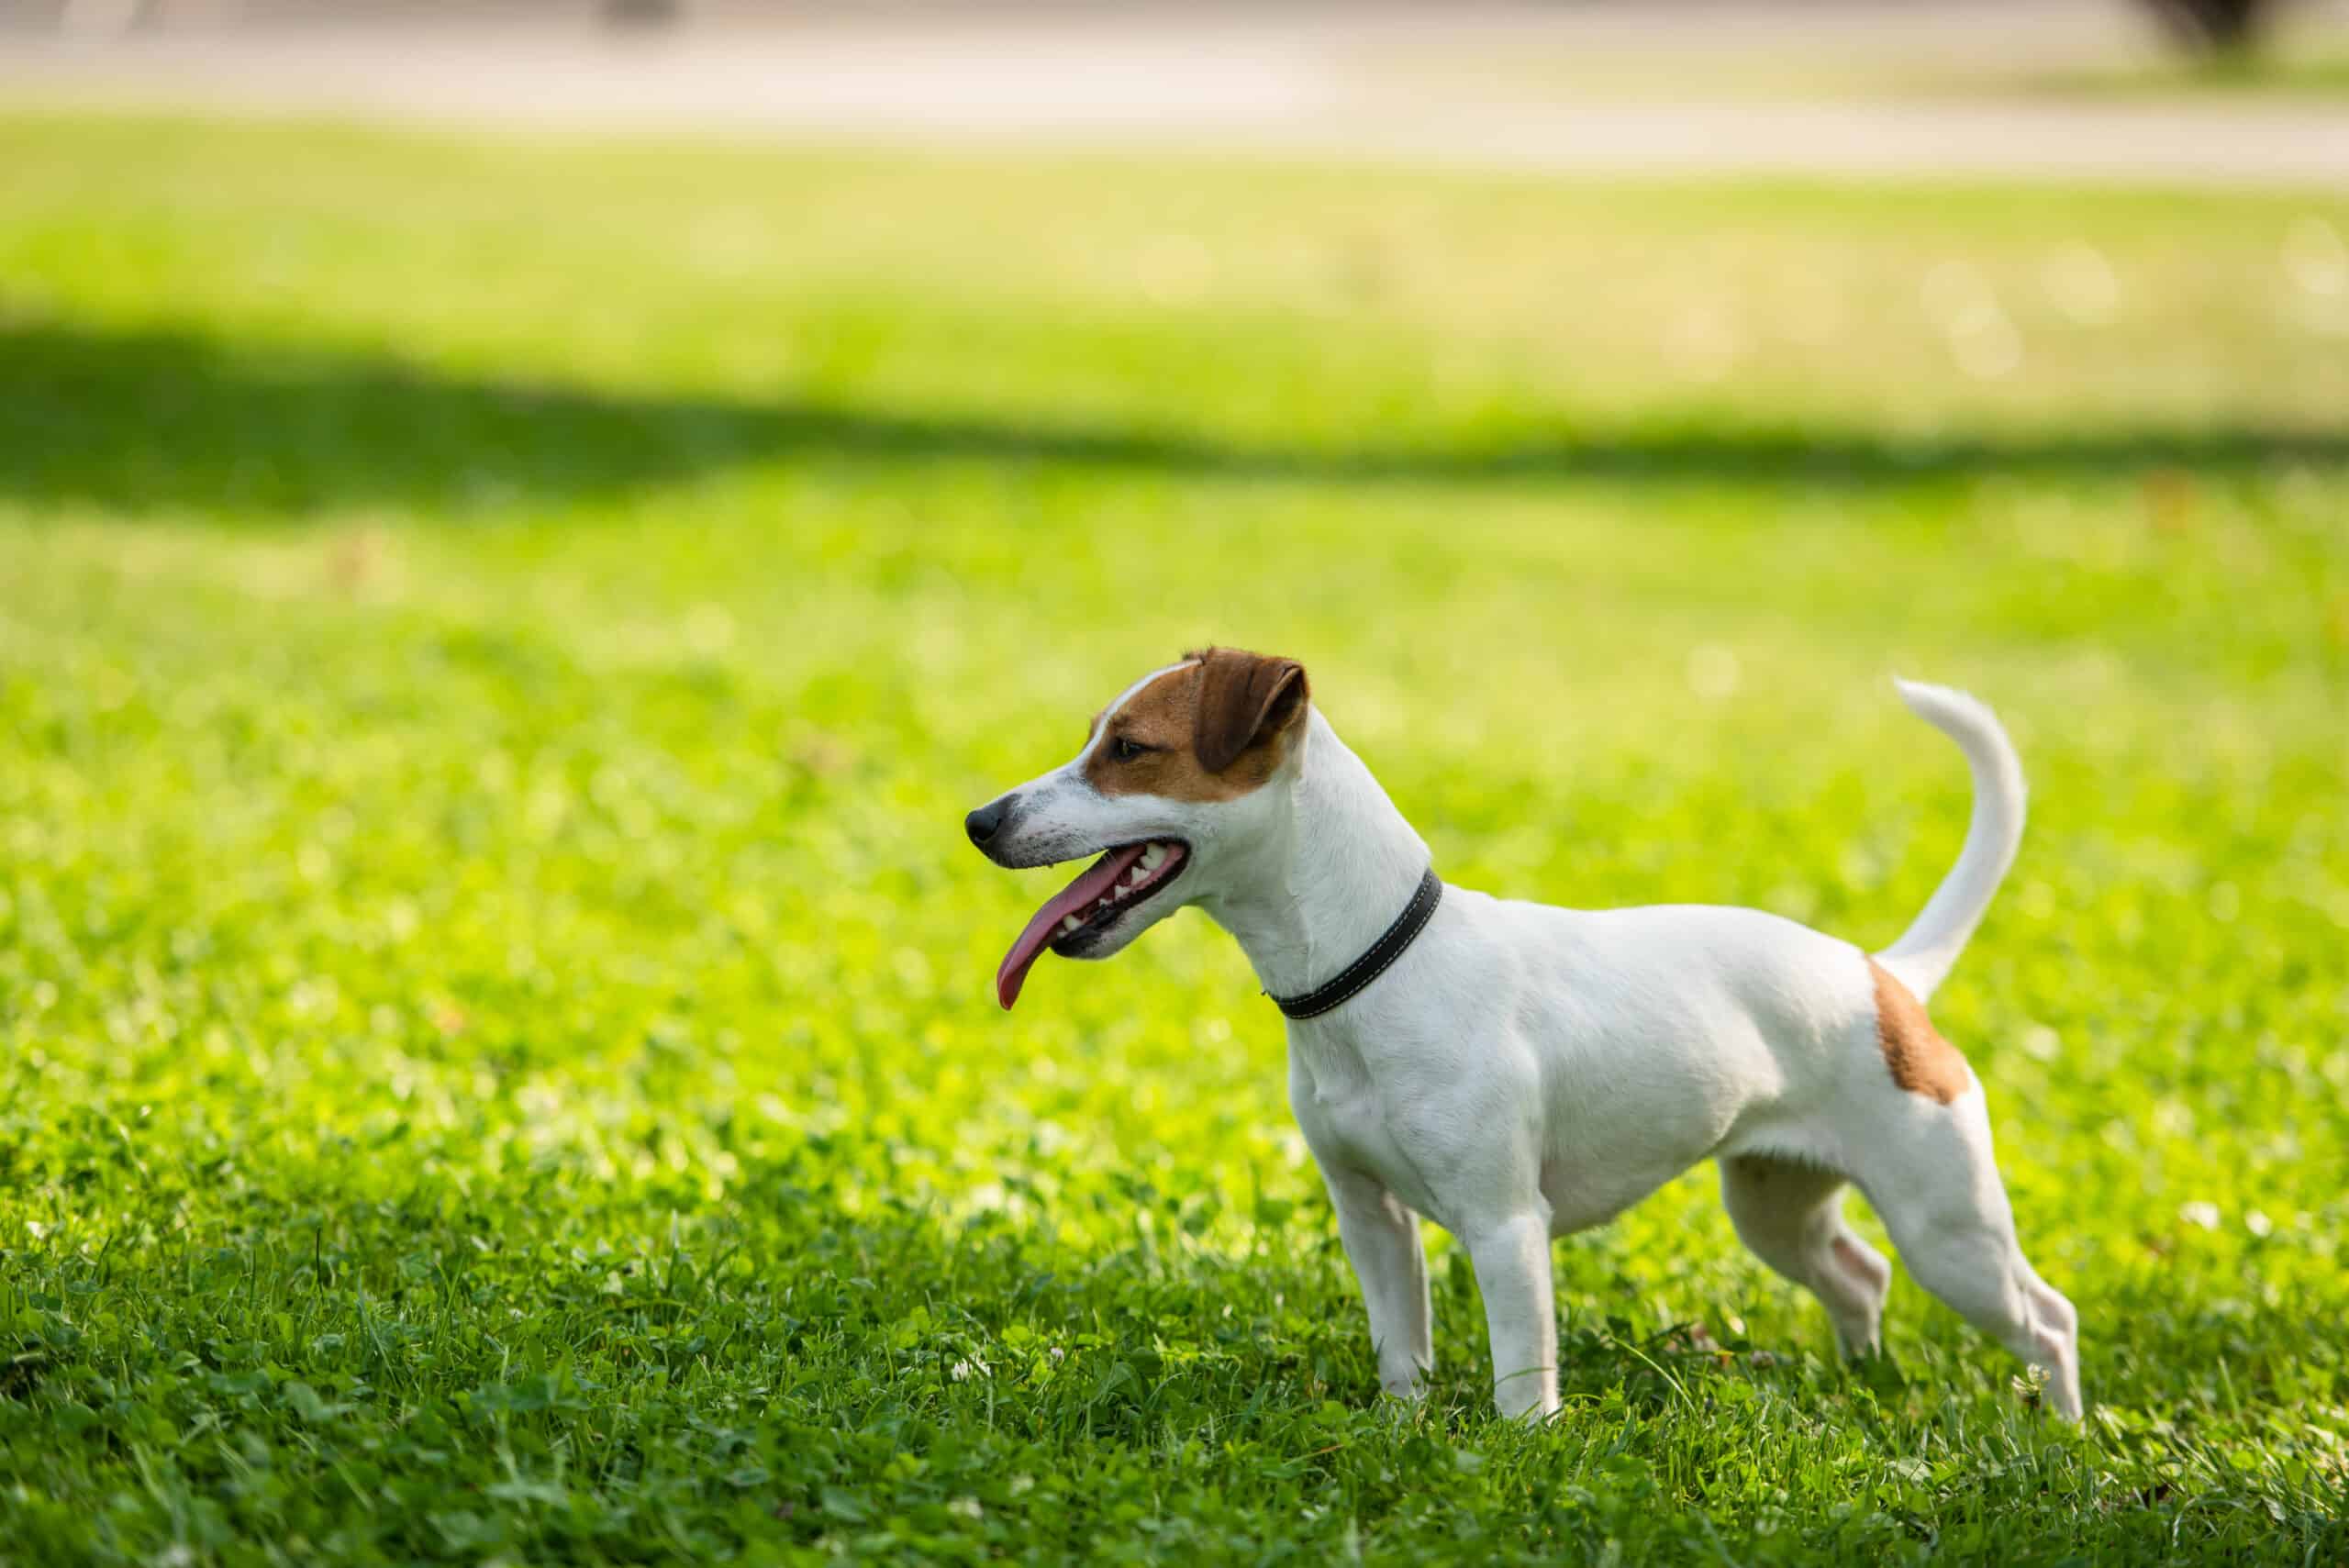 Jack Russell Terrier in the yard